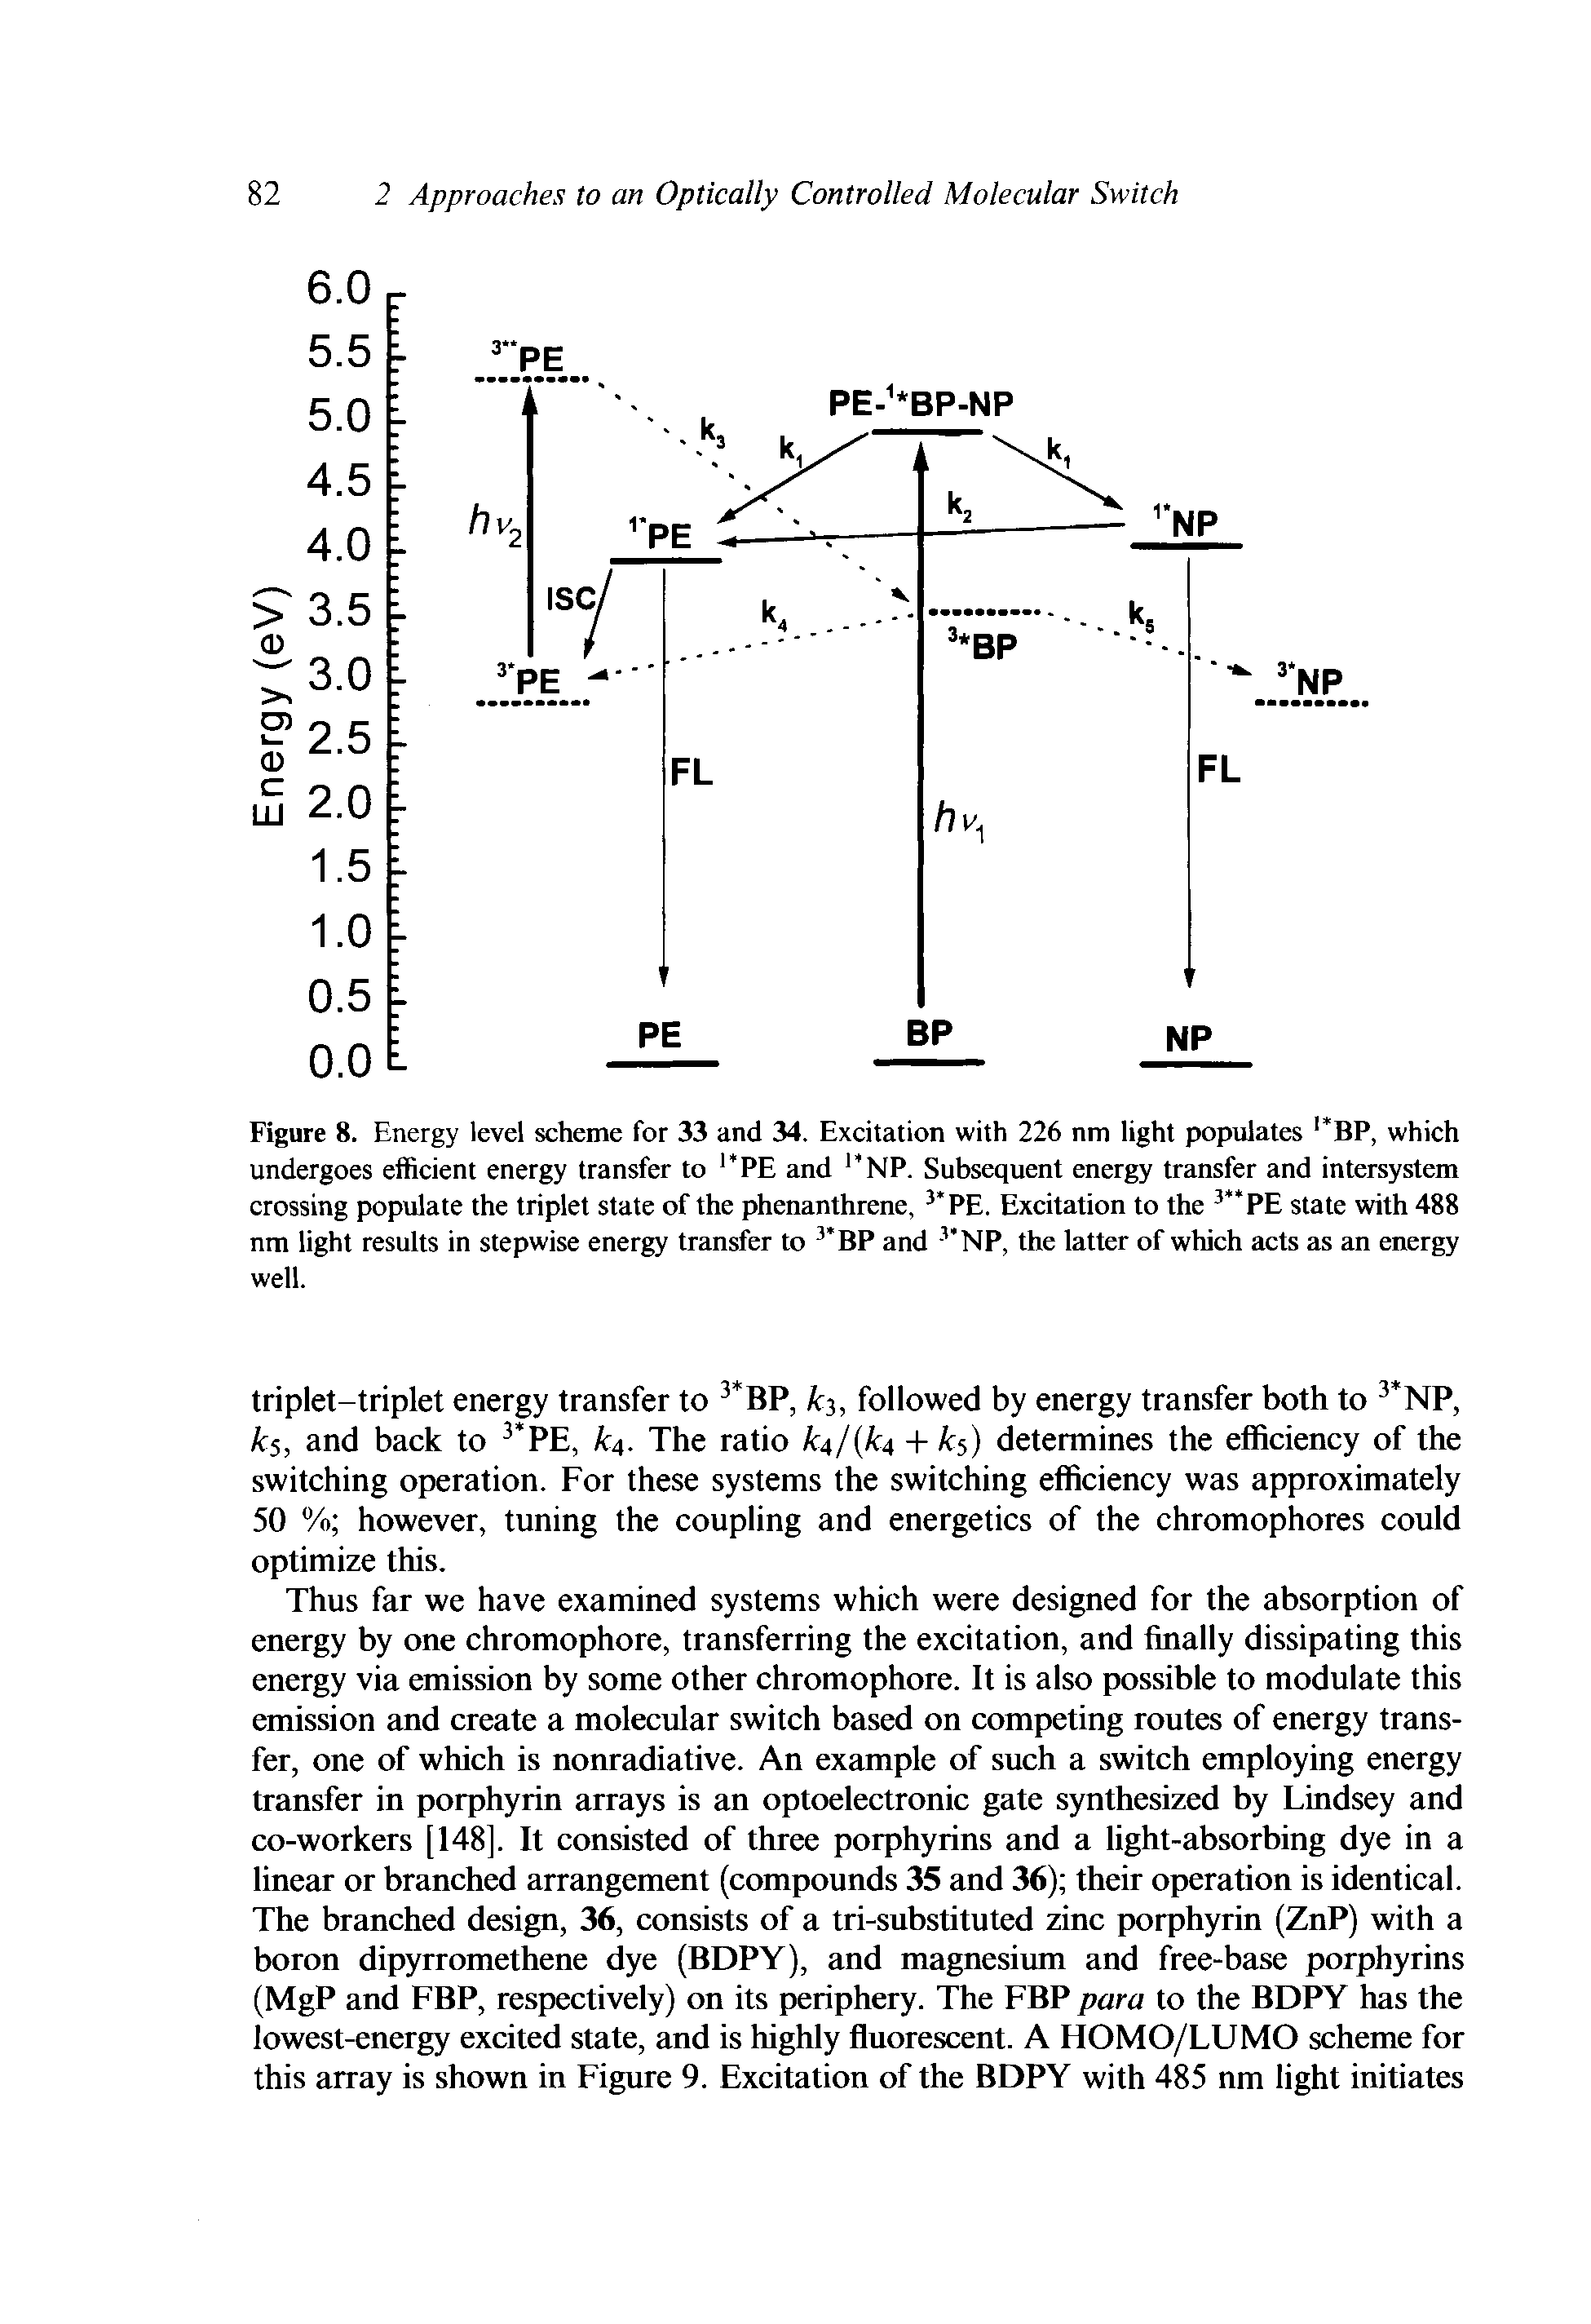 Figure 8. Energy level scheme for 33 and 34. Excitation with 226 nm light populates BP, which undergoes efficient energy transfer to PE and NP. Subsequent energy transfer and intersystem crossing populate the triplet state of the phenanthrene, PE. Excitation to the PE state with 488 nm light results in stepwise energy transfer to BP and NP, the latter of which acts as an energy well.